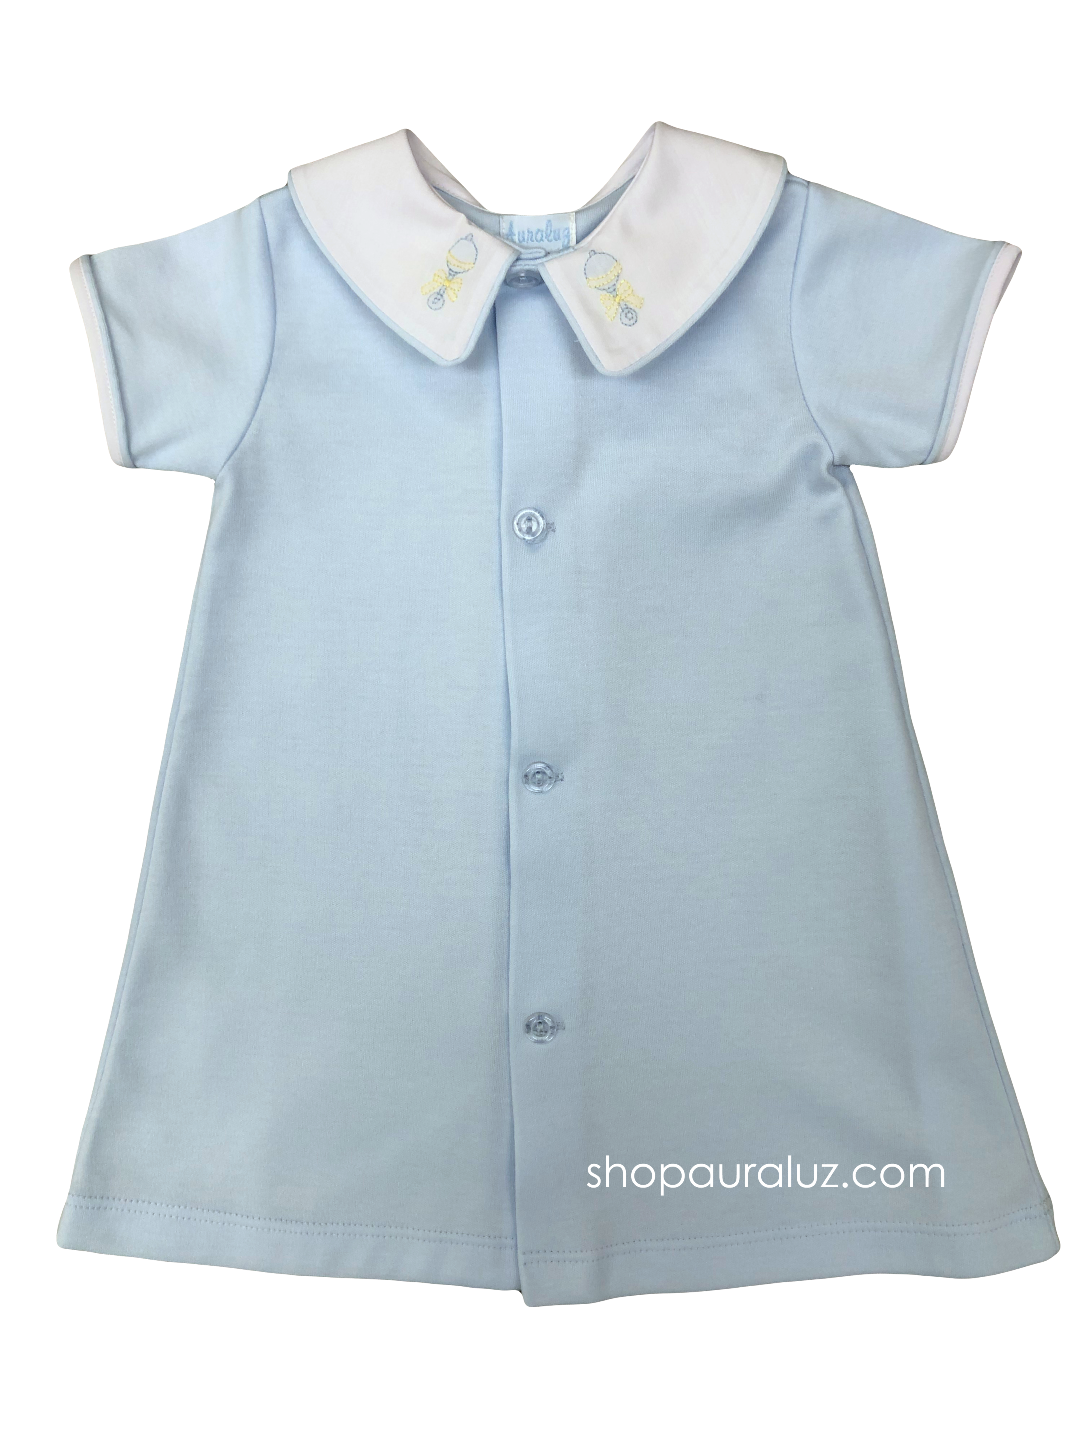 Auraluz Knit Boy Day Gown...Blue w/white boy collar and embroidered rattles